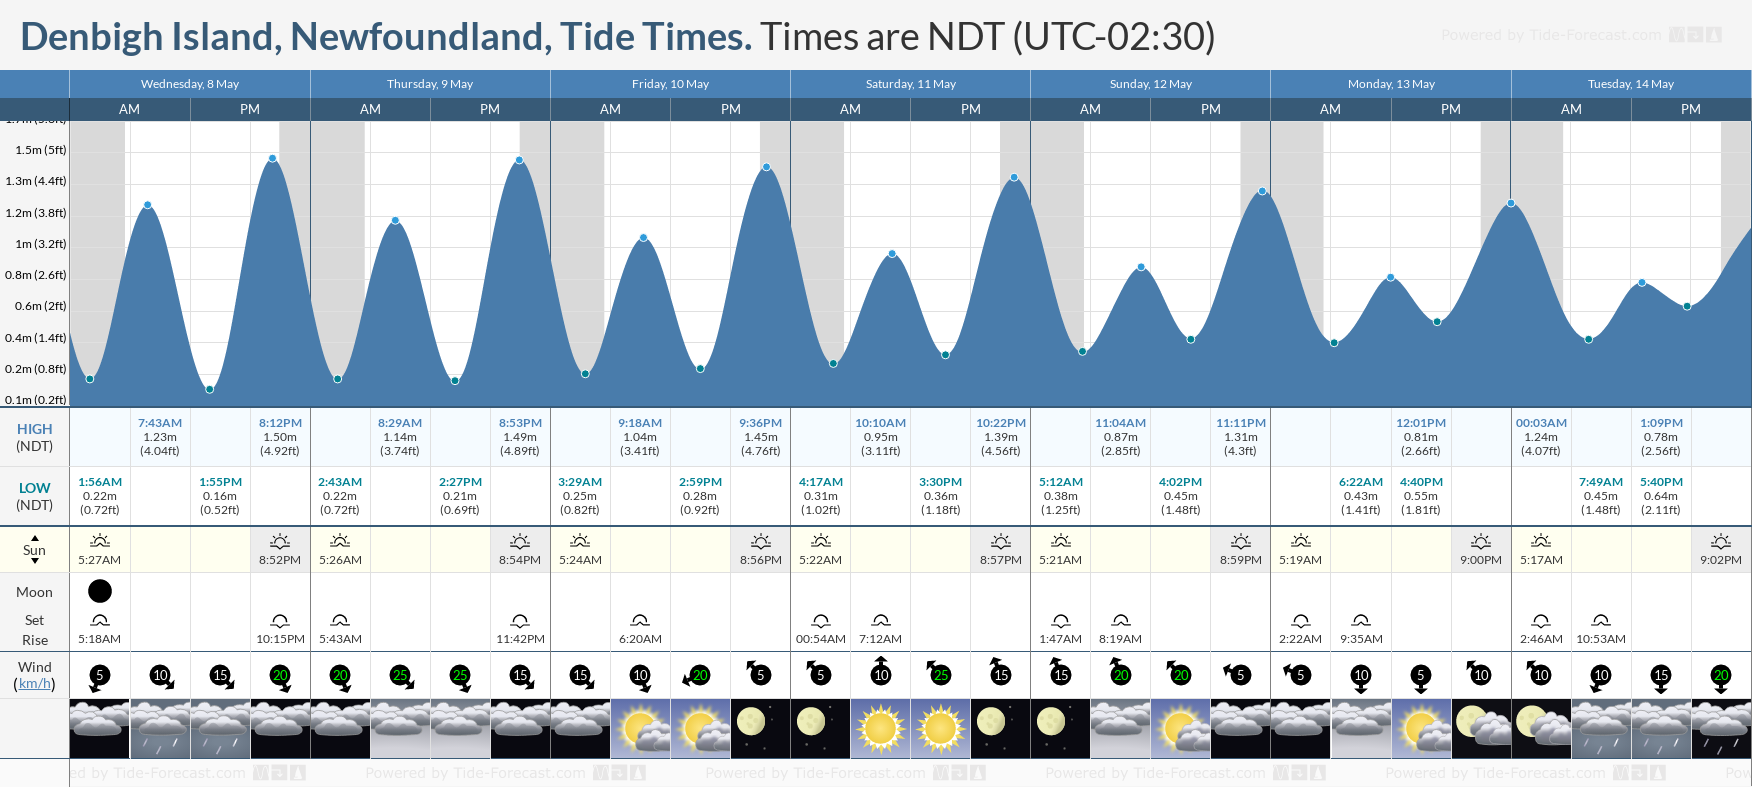 Denbigh Island, Newfoundland Tide Chart including high and low tide tide times for the next 7 days